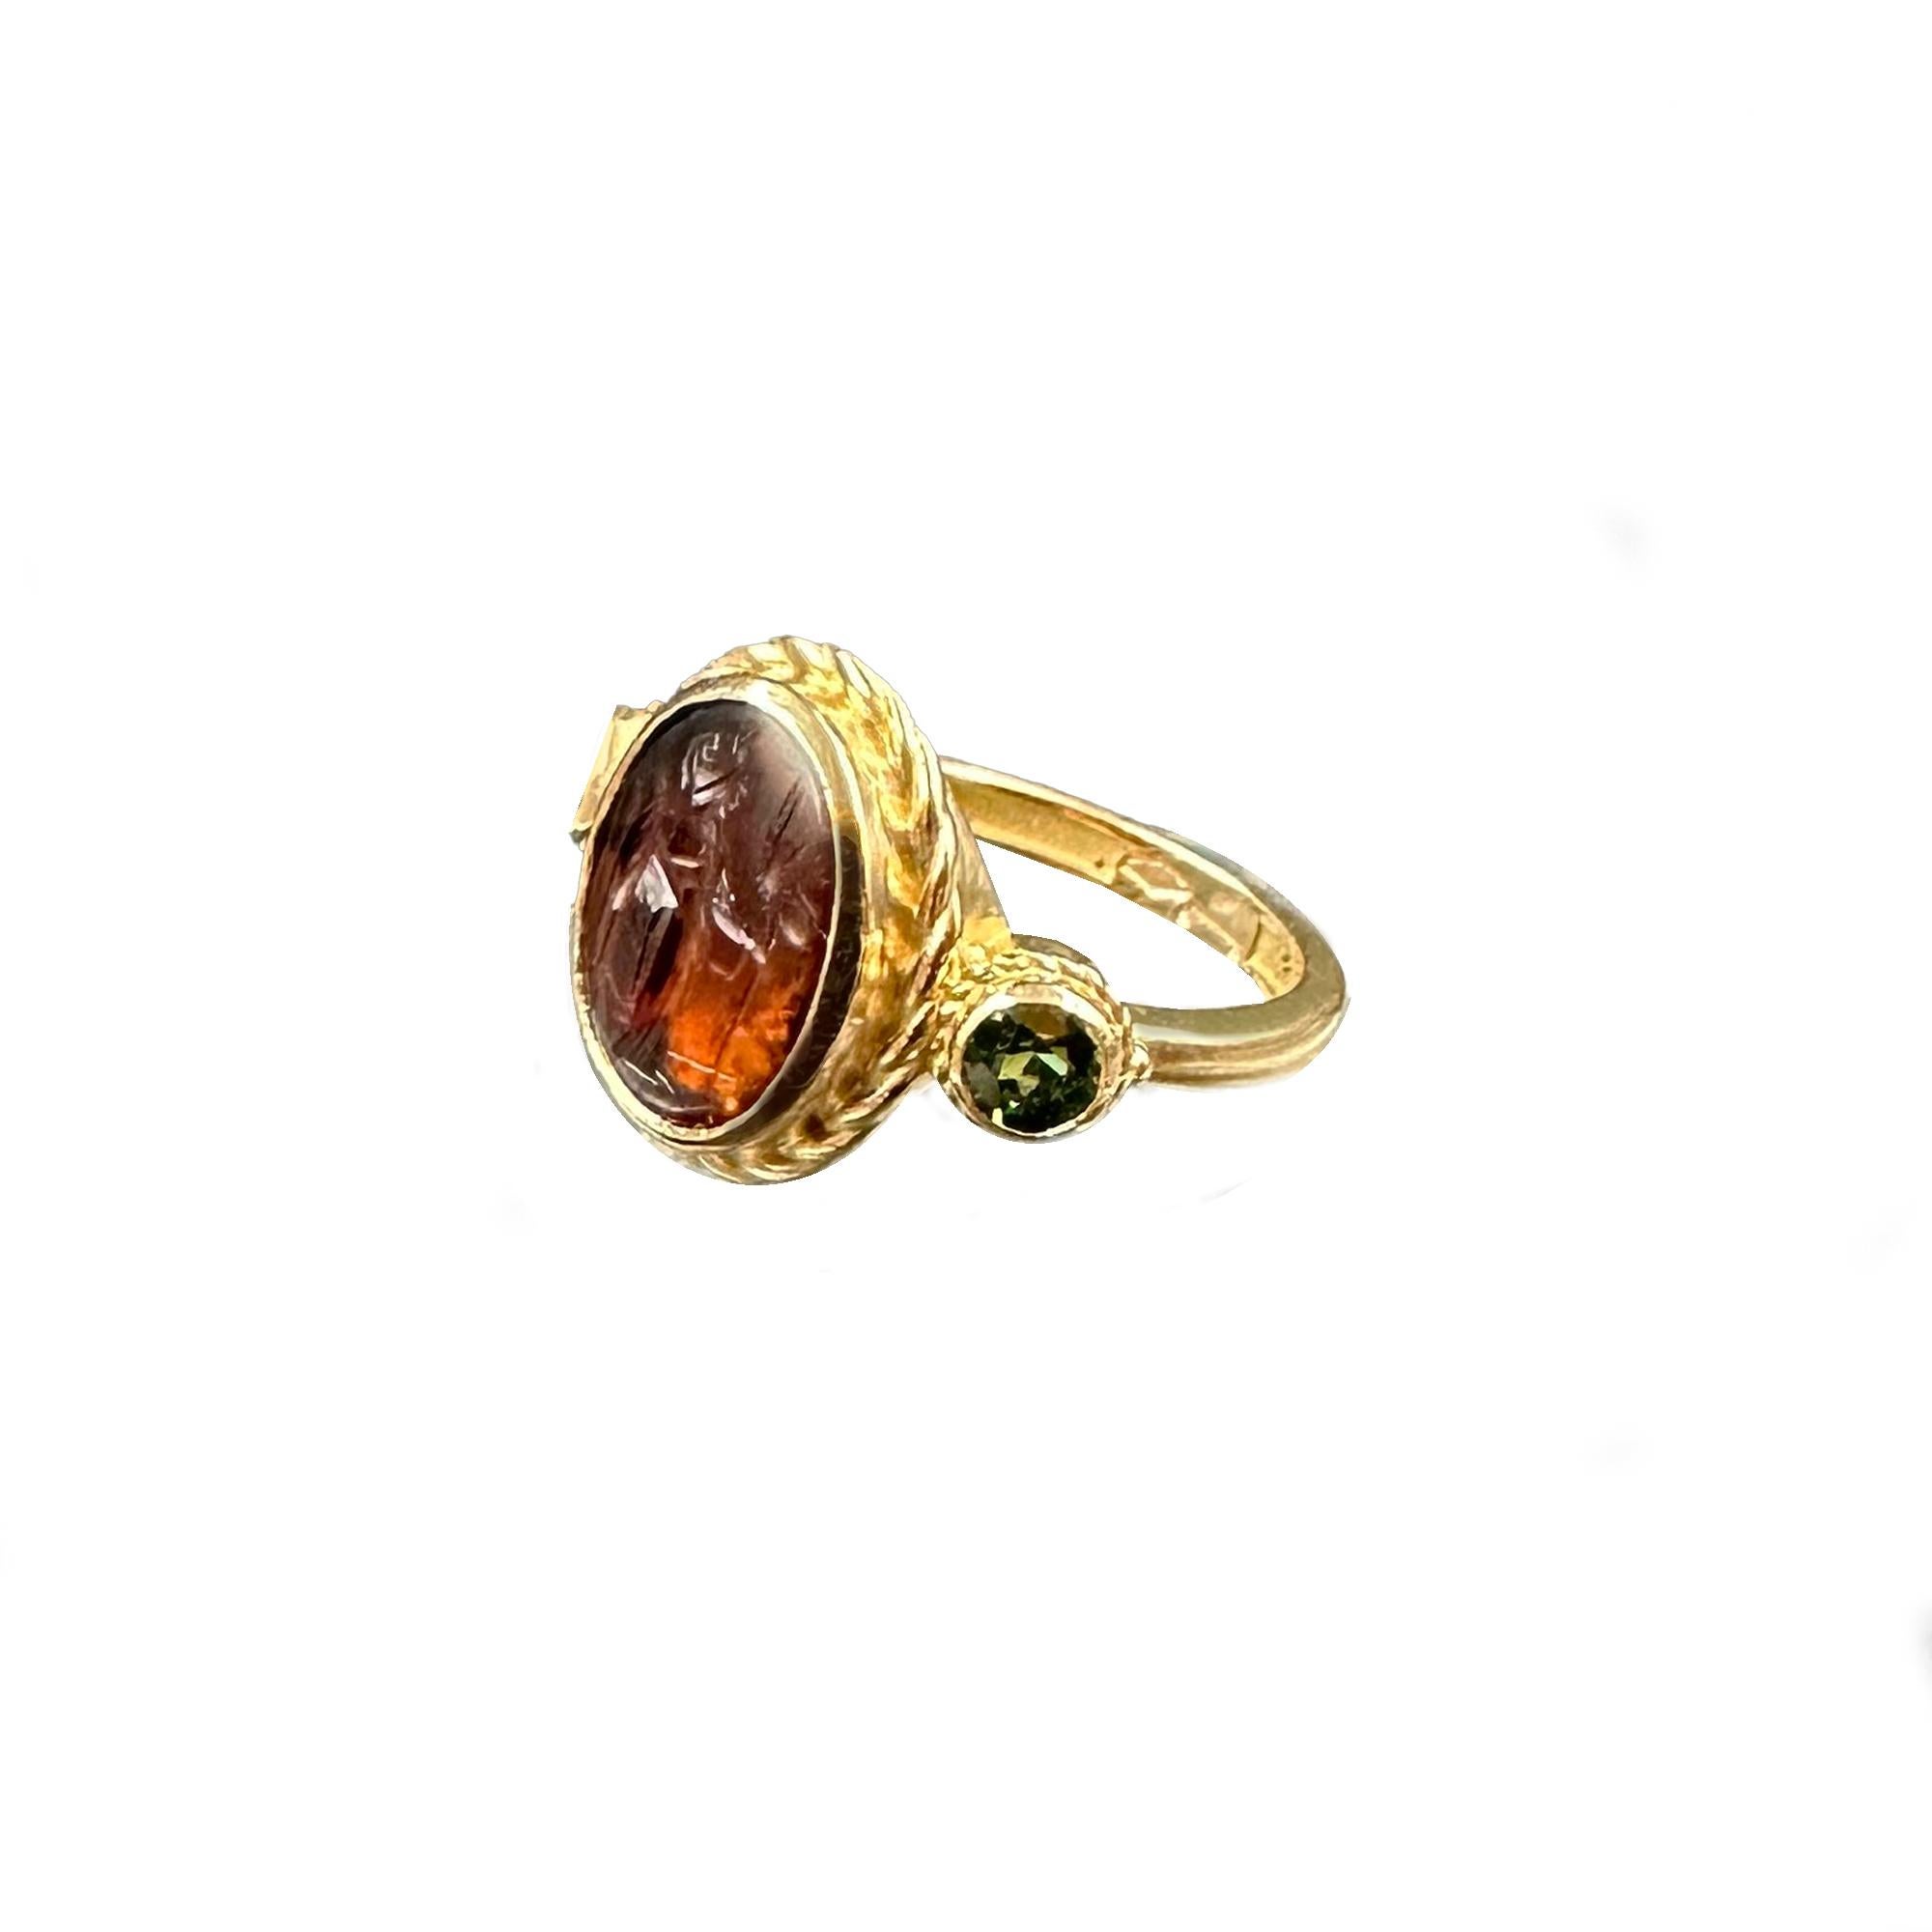 Roman Carnelian Iintaglio 1ST-2ND Cent. AD 18 KT Gold Ring Depicting Demeter For Sale 3